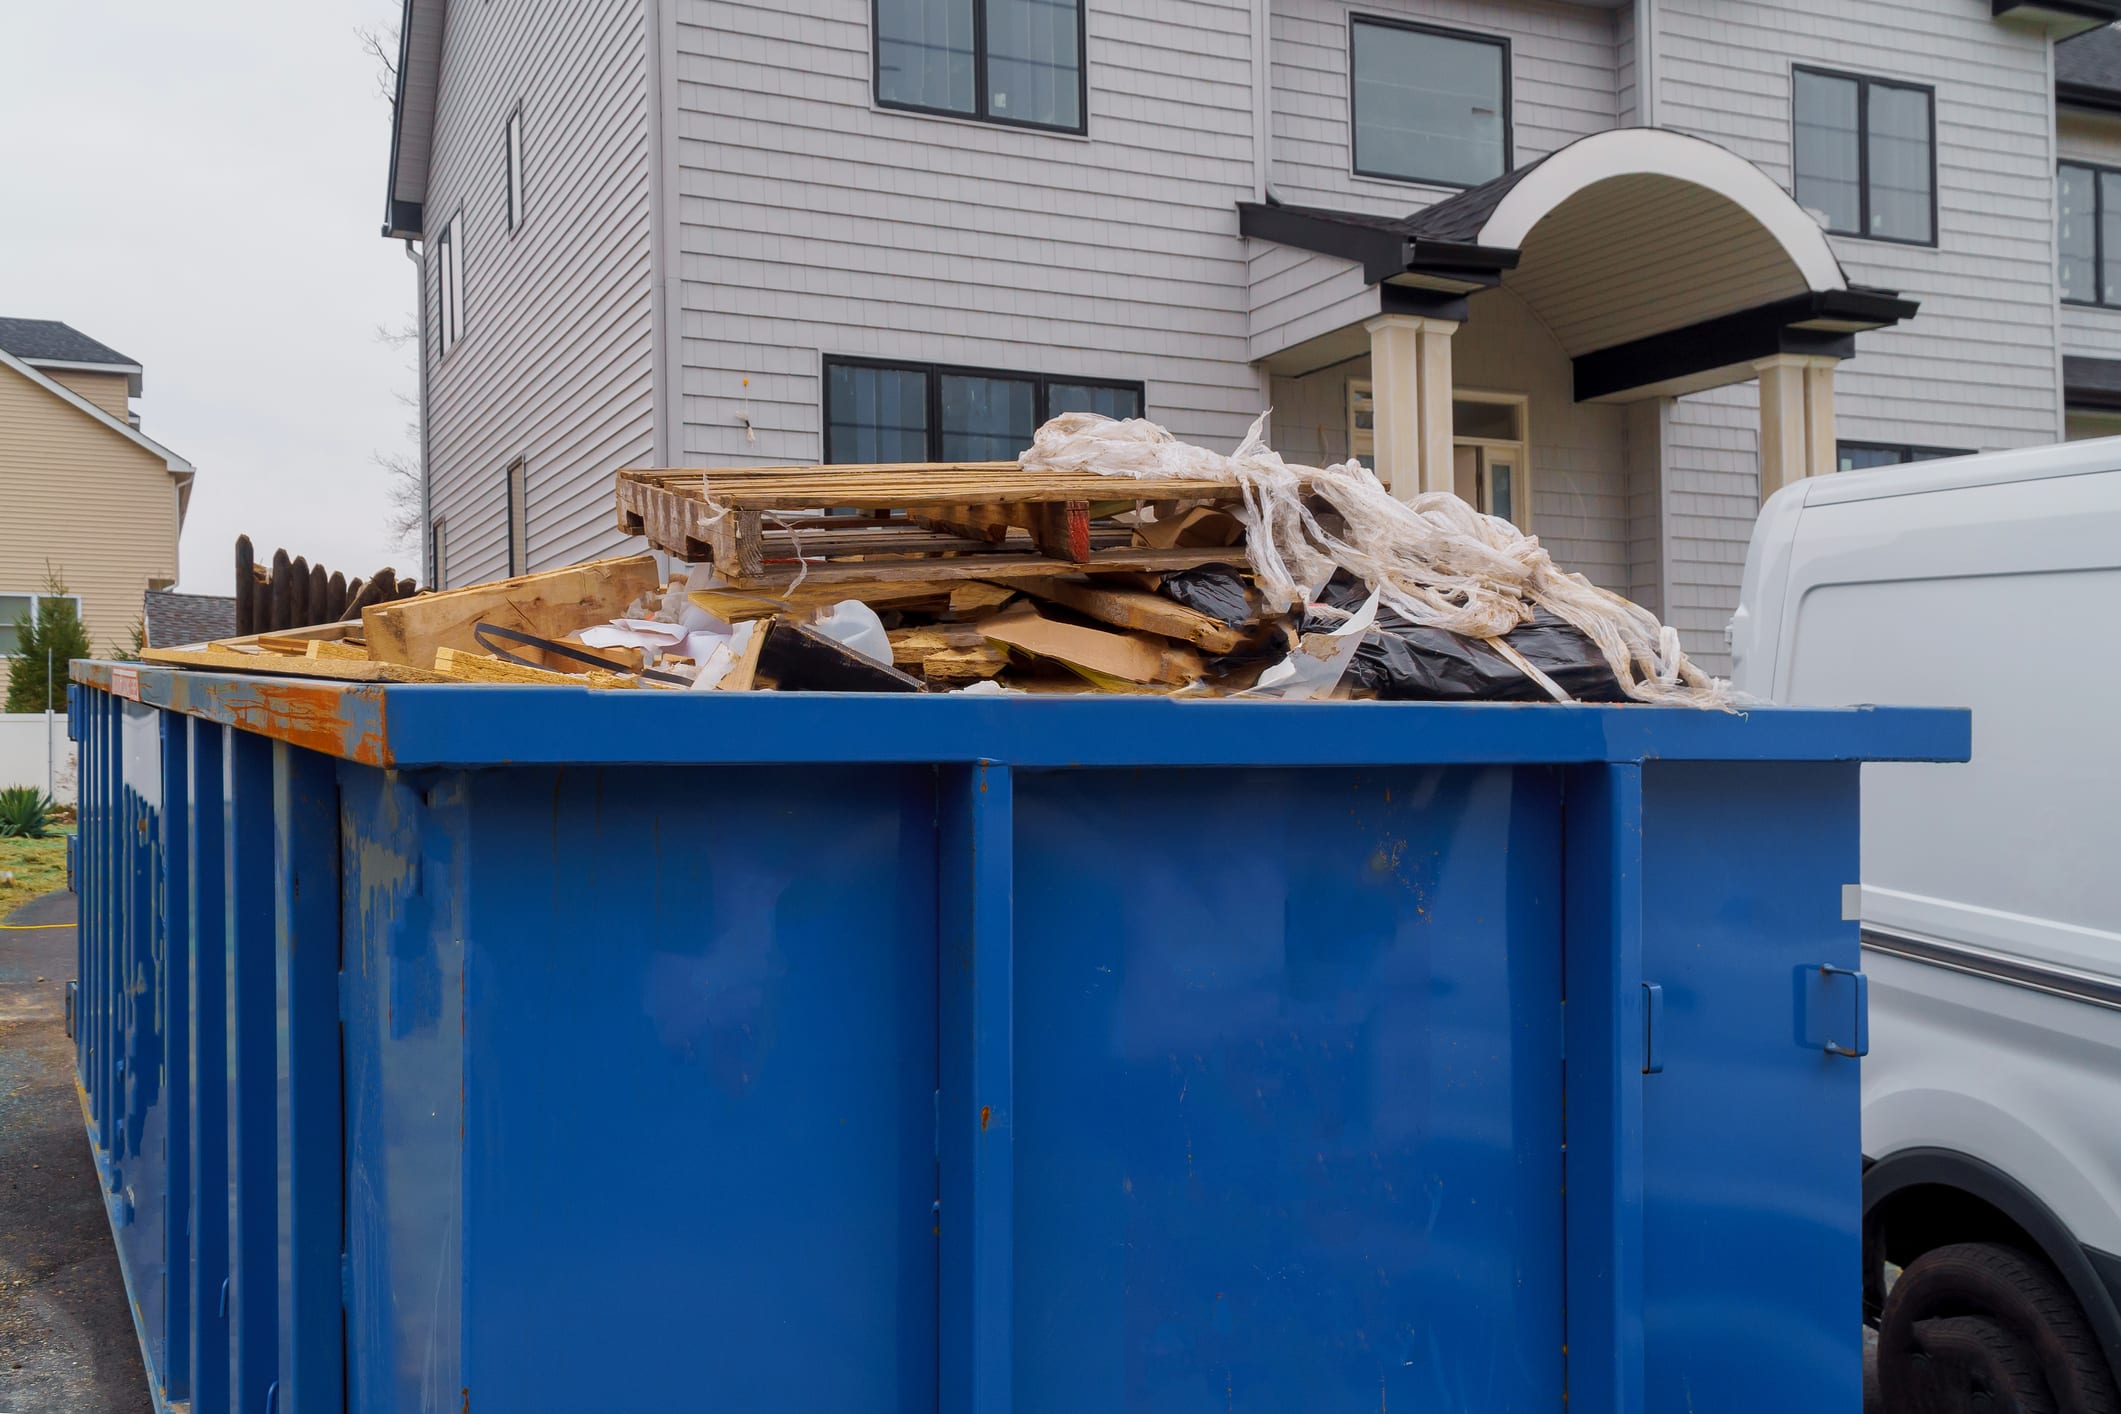 Why Rent a Dumpster in the Fall